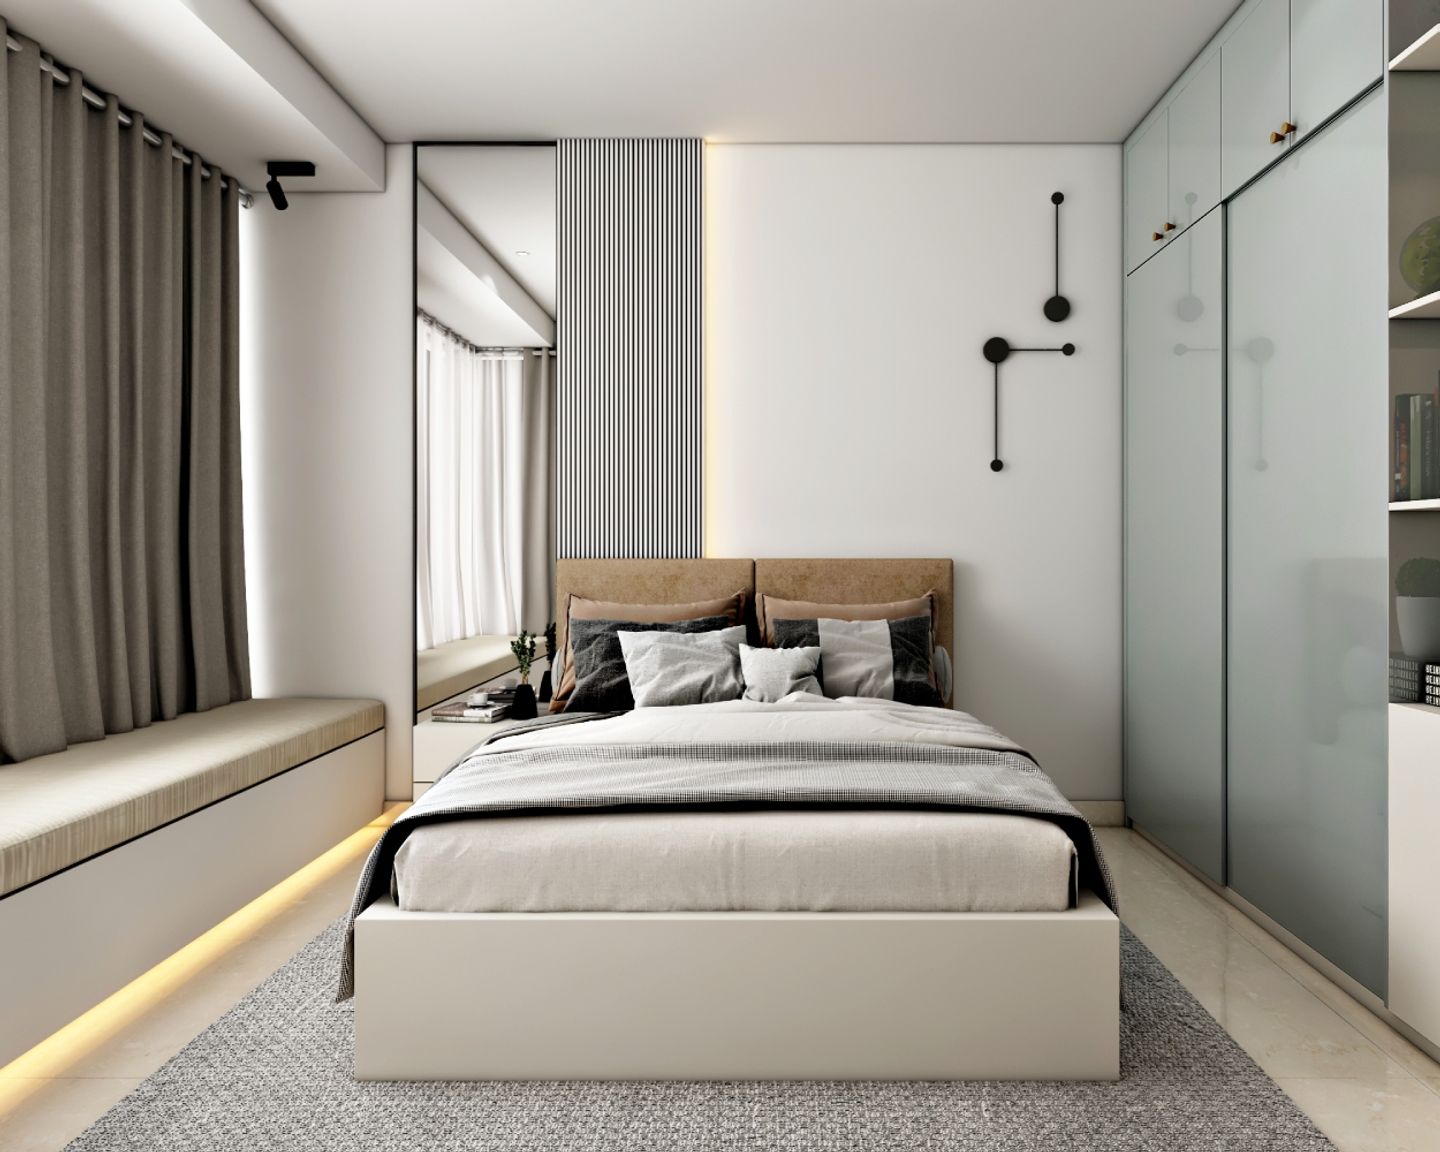 Guest Room Design With Brown And White Bed, Beige Window Seater And 2-Door Grey Sliding Wardrobe - Livspace